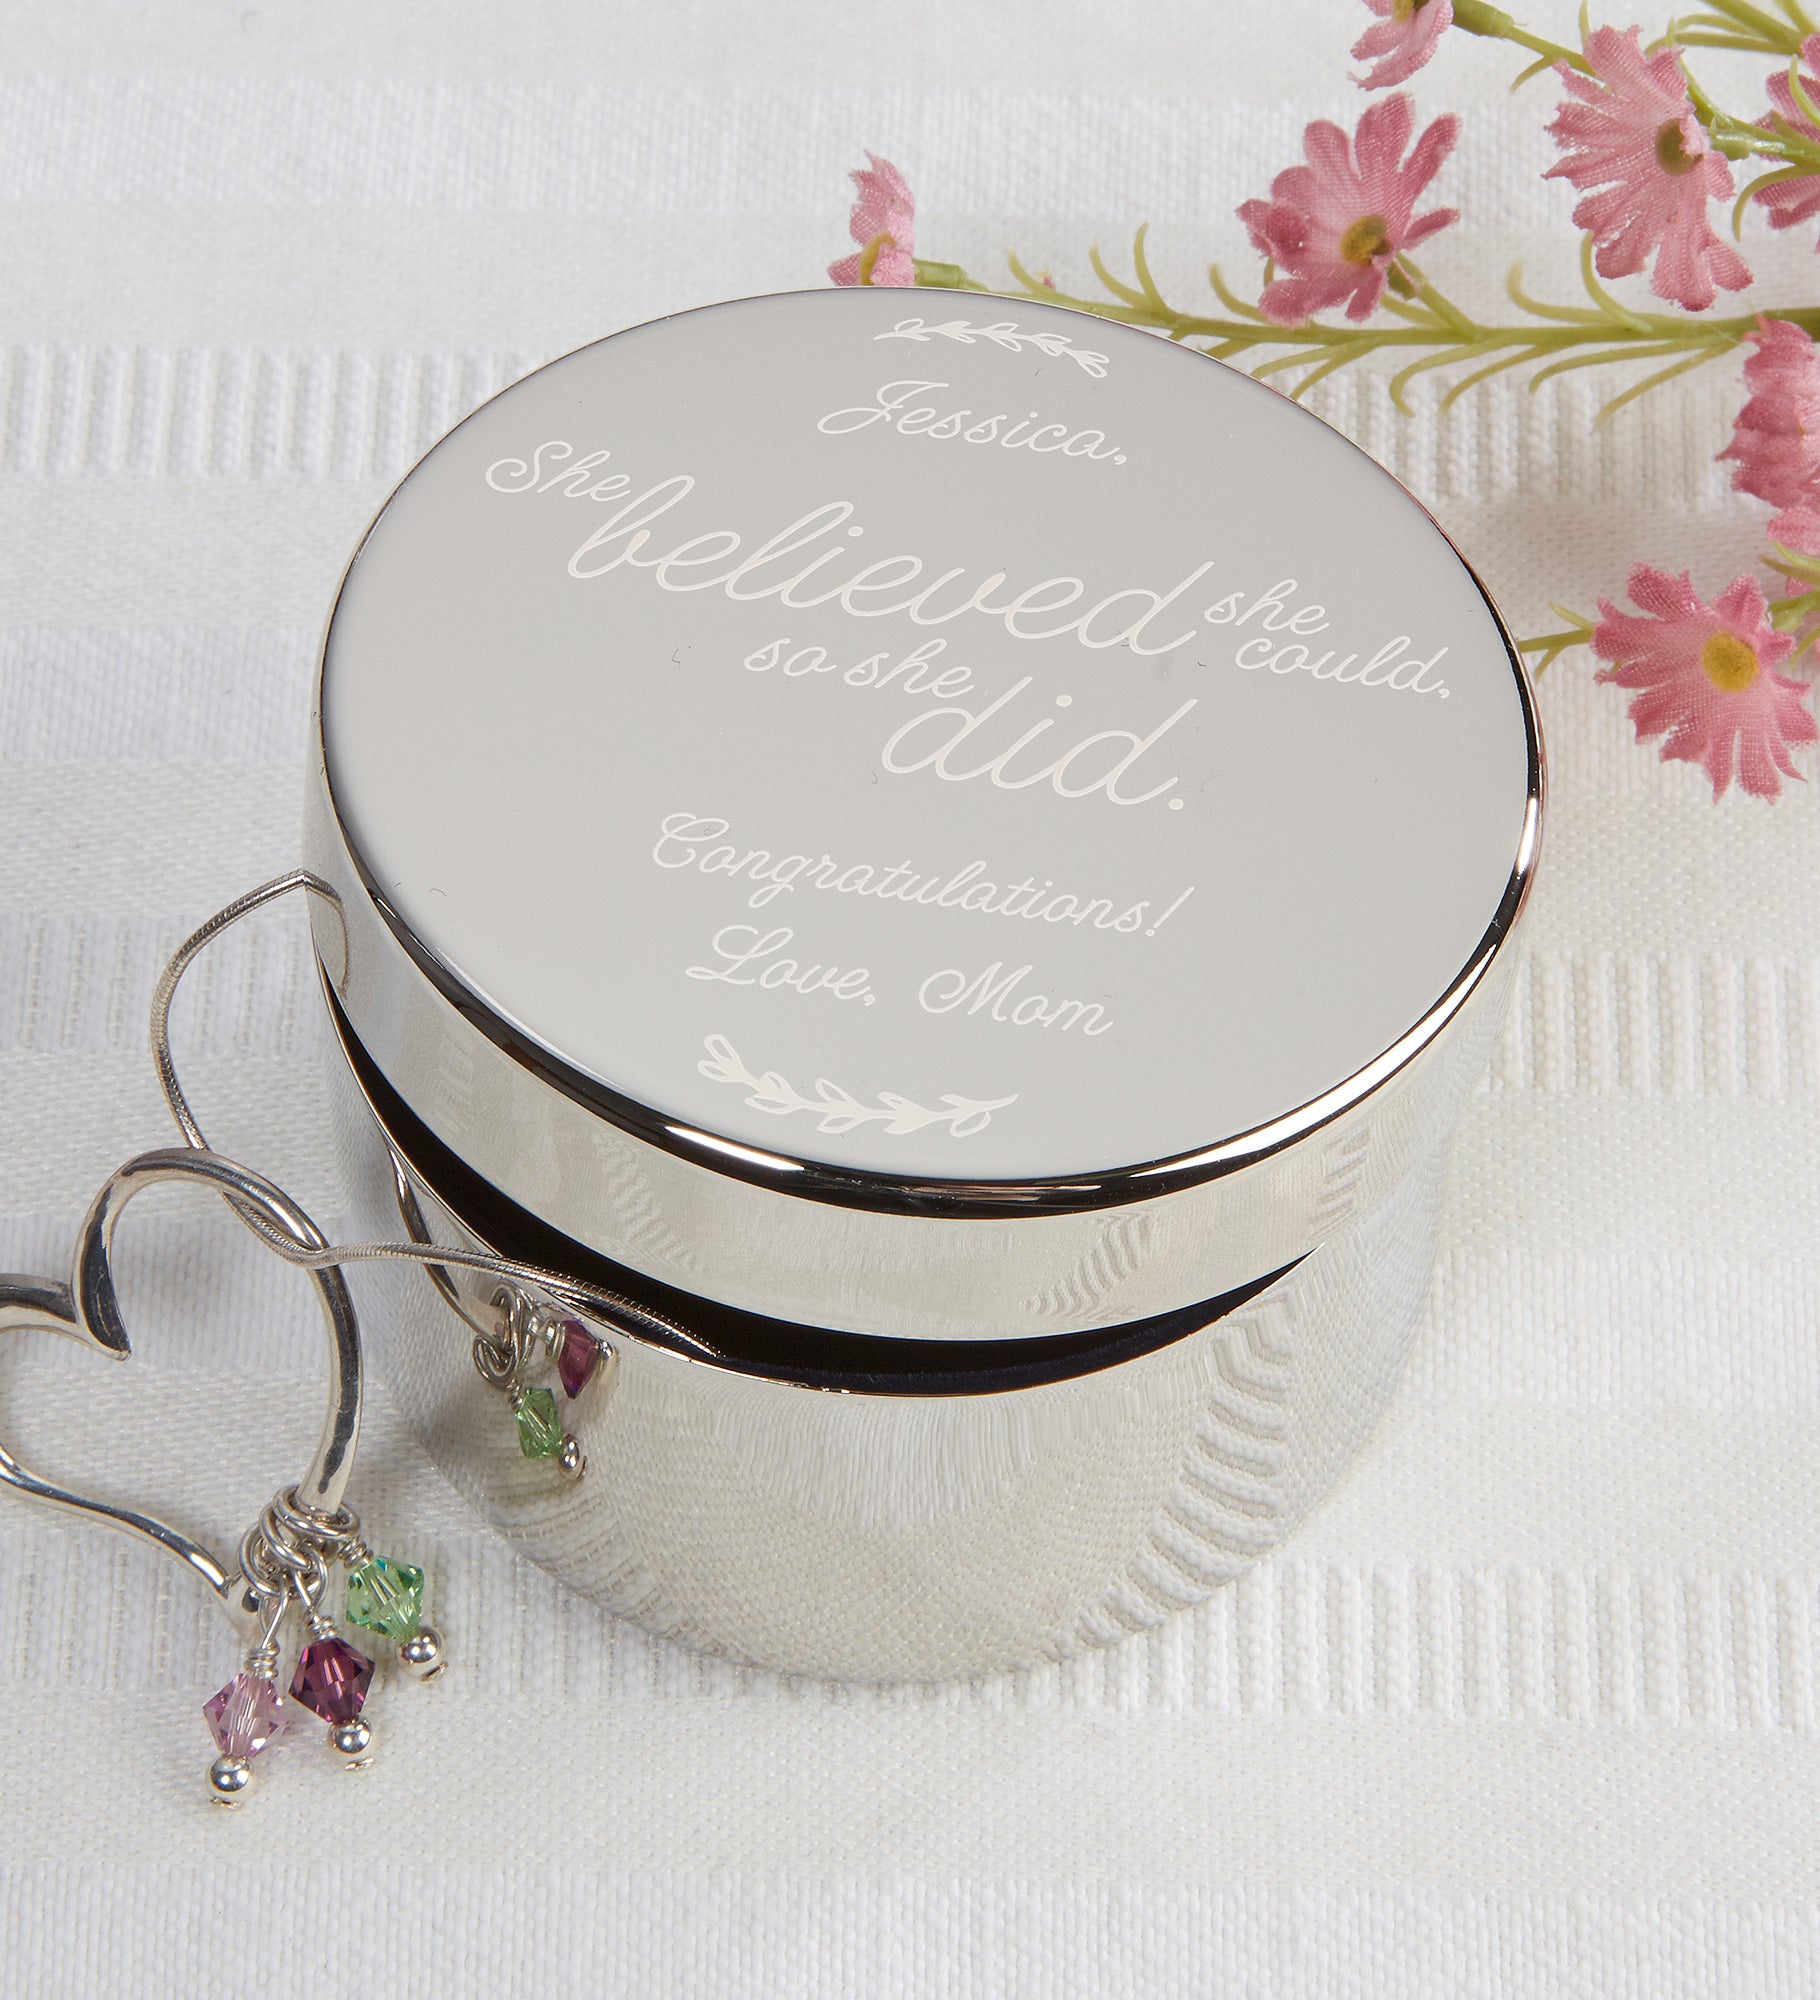 Inspiration For Her Personalized Keepsake Box